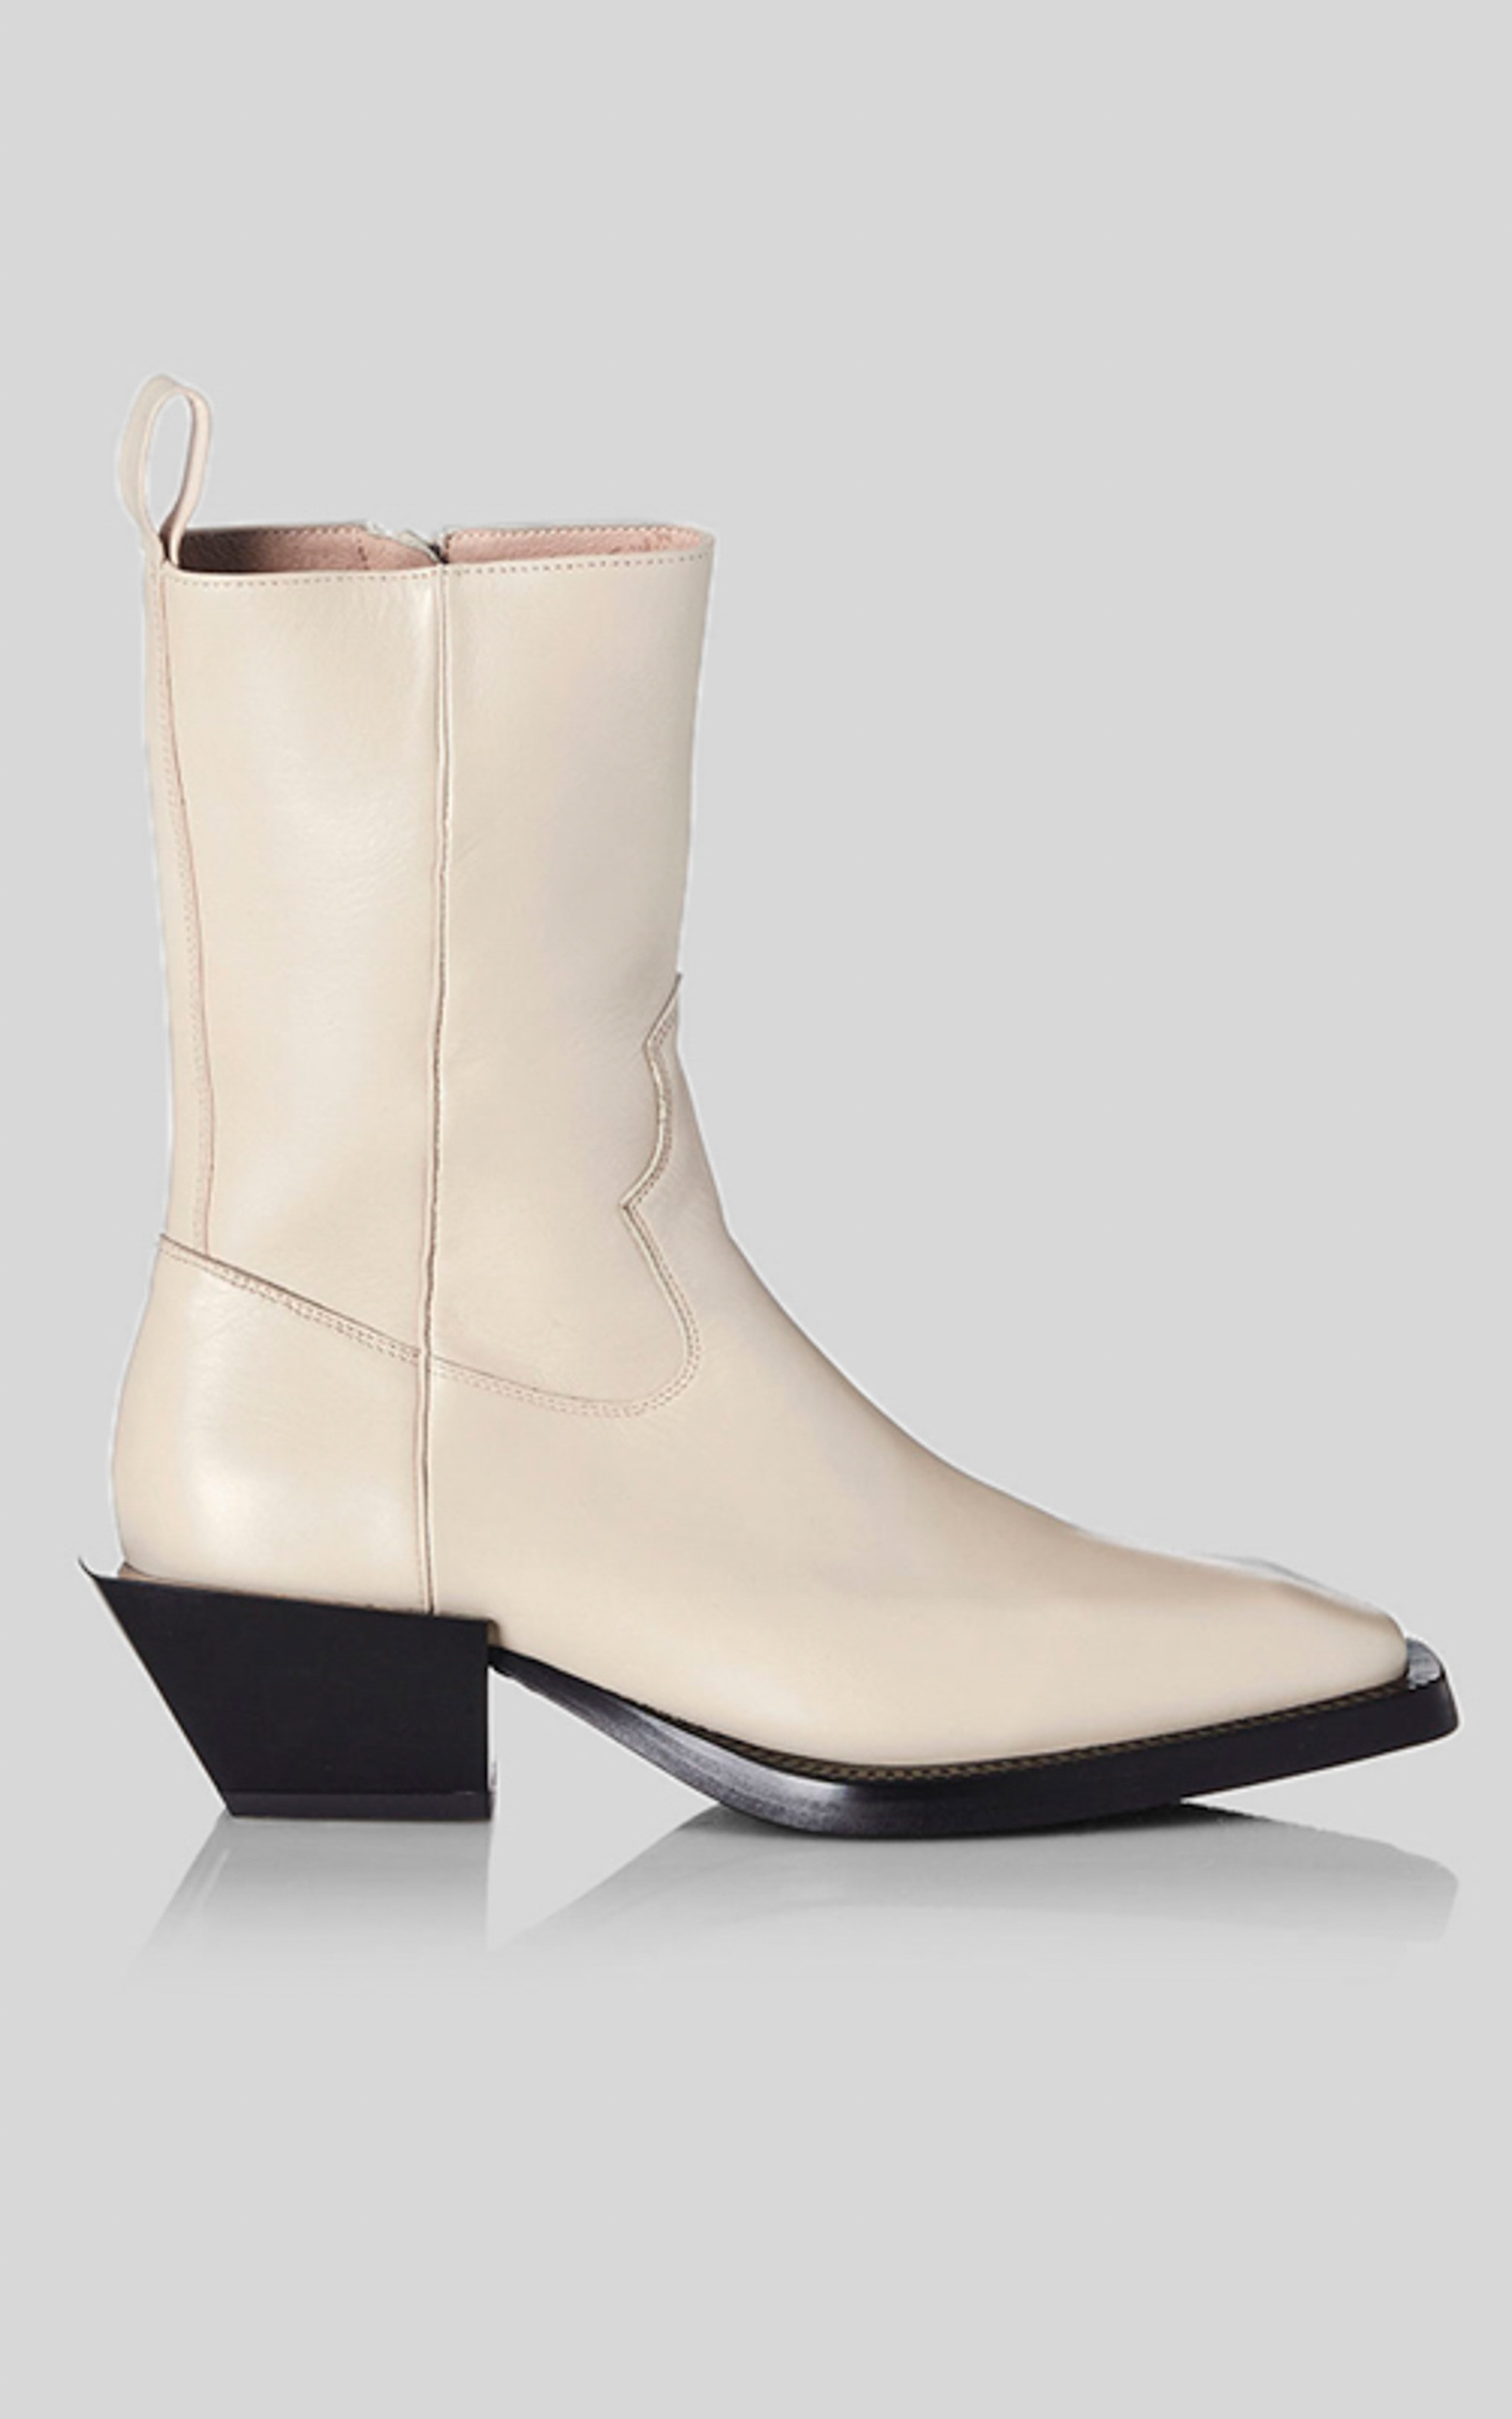 Alias Mae - Penny Boots in Cream Leather - 05, CRE2, hi-res image number null